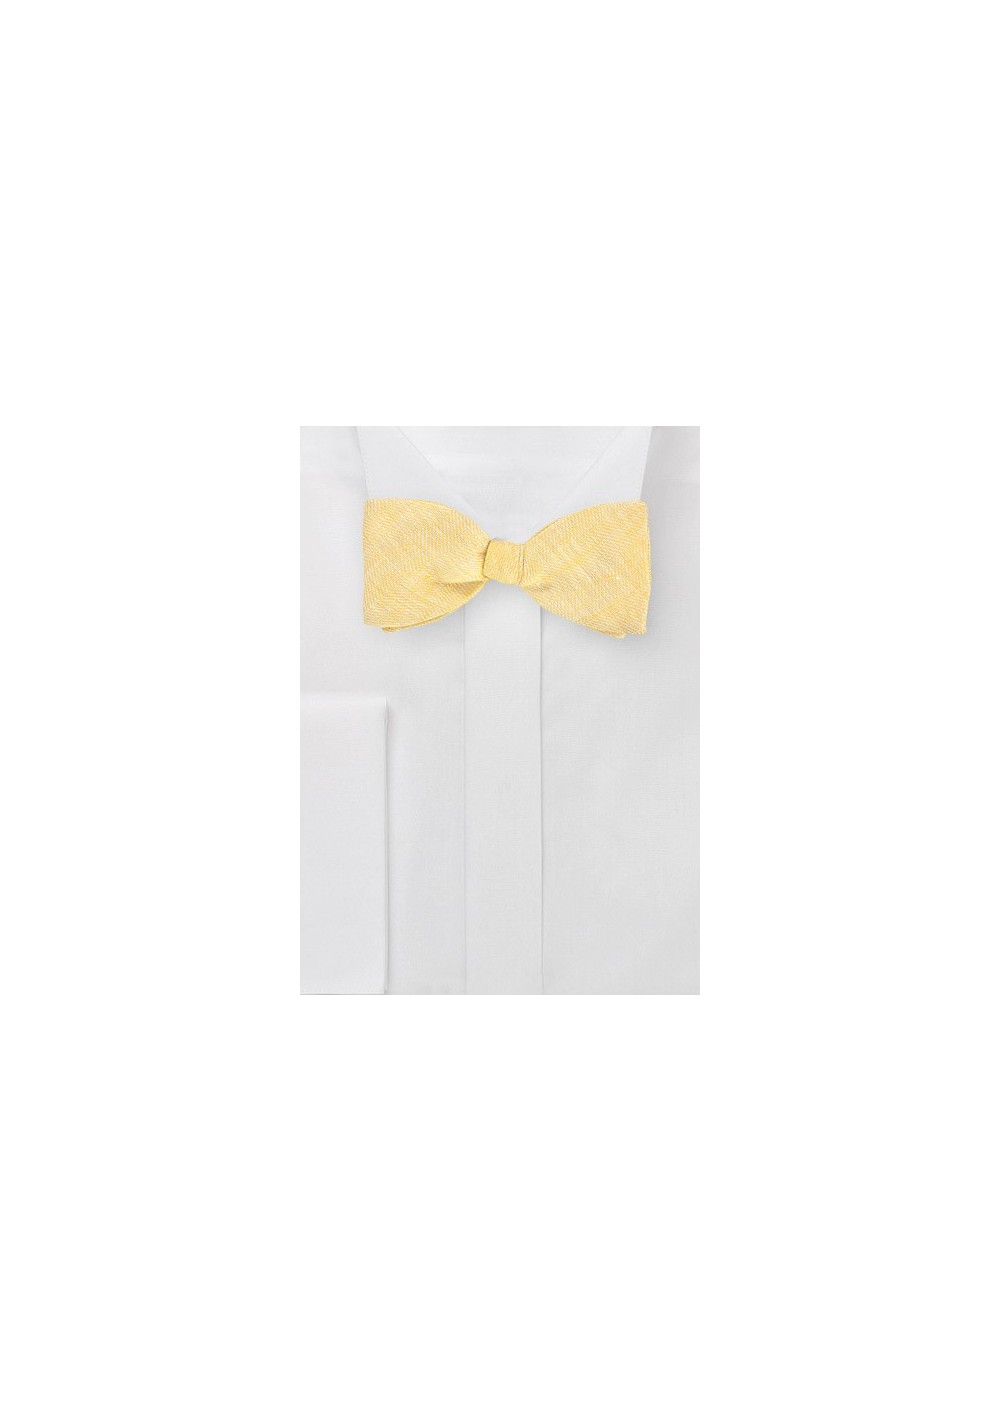 Linen Bow Tie in Vintage Yellow